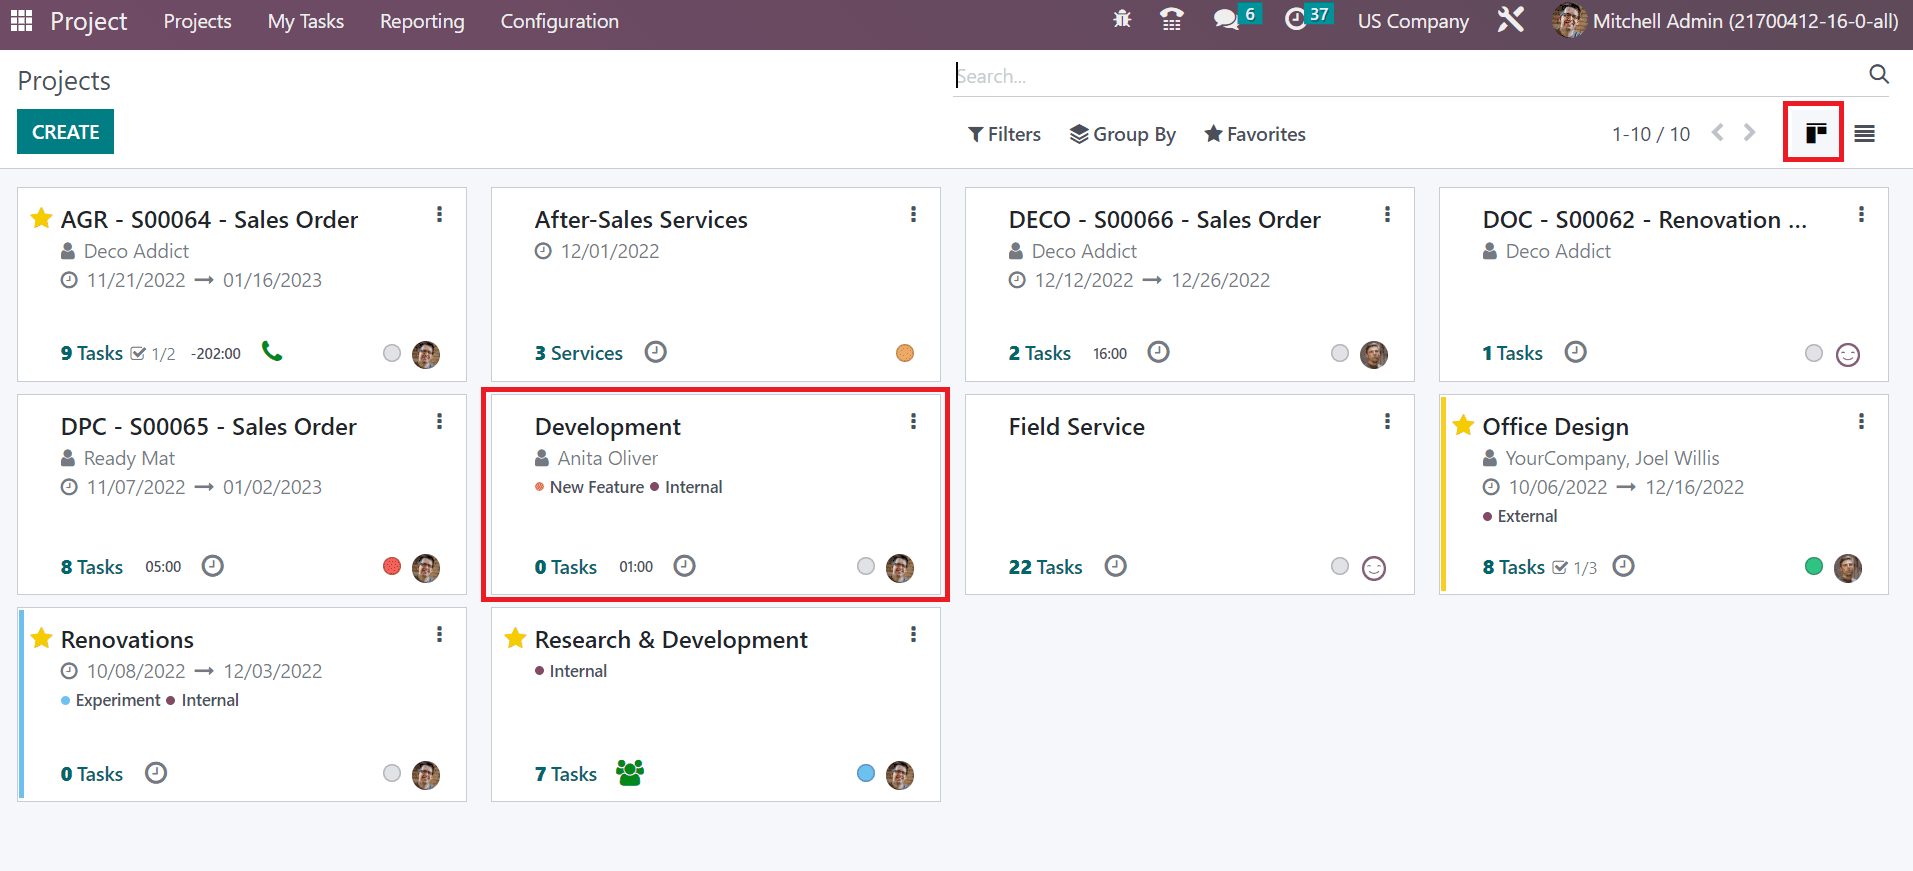 How to Configure Projects in a Usa Company Using Odoo 16?